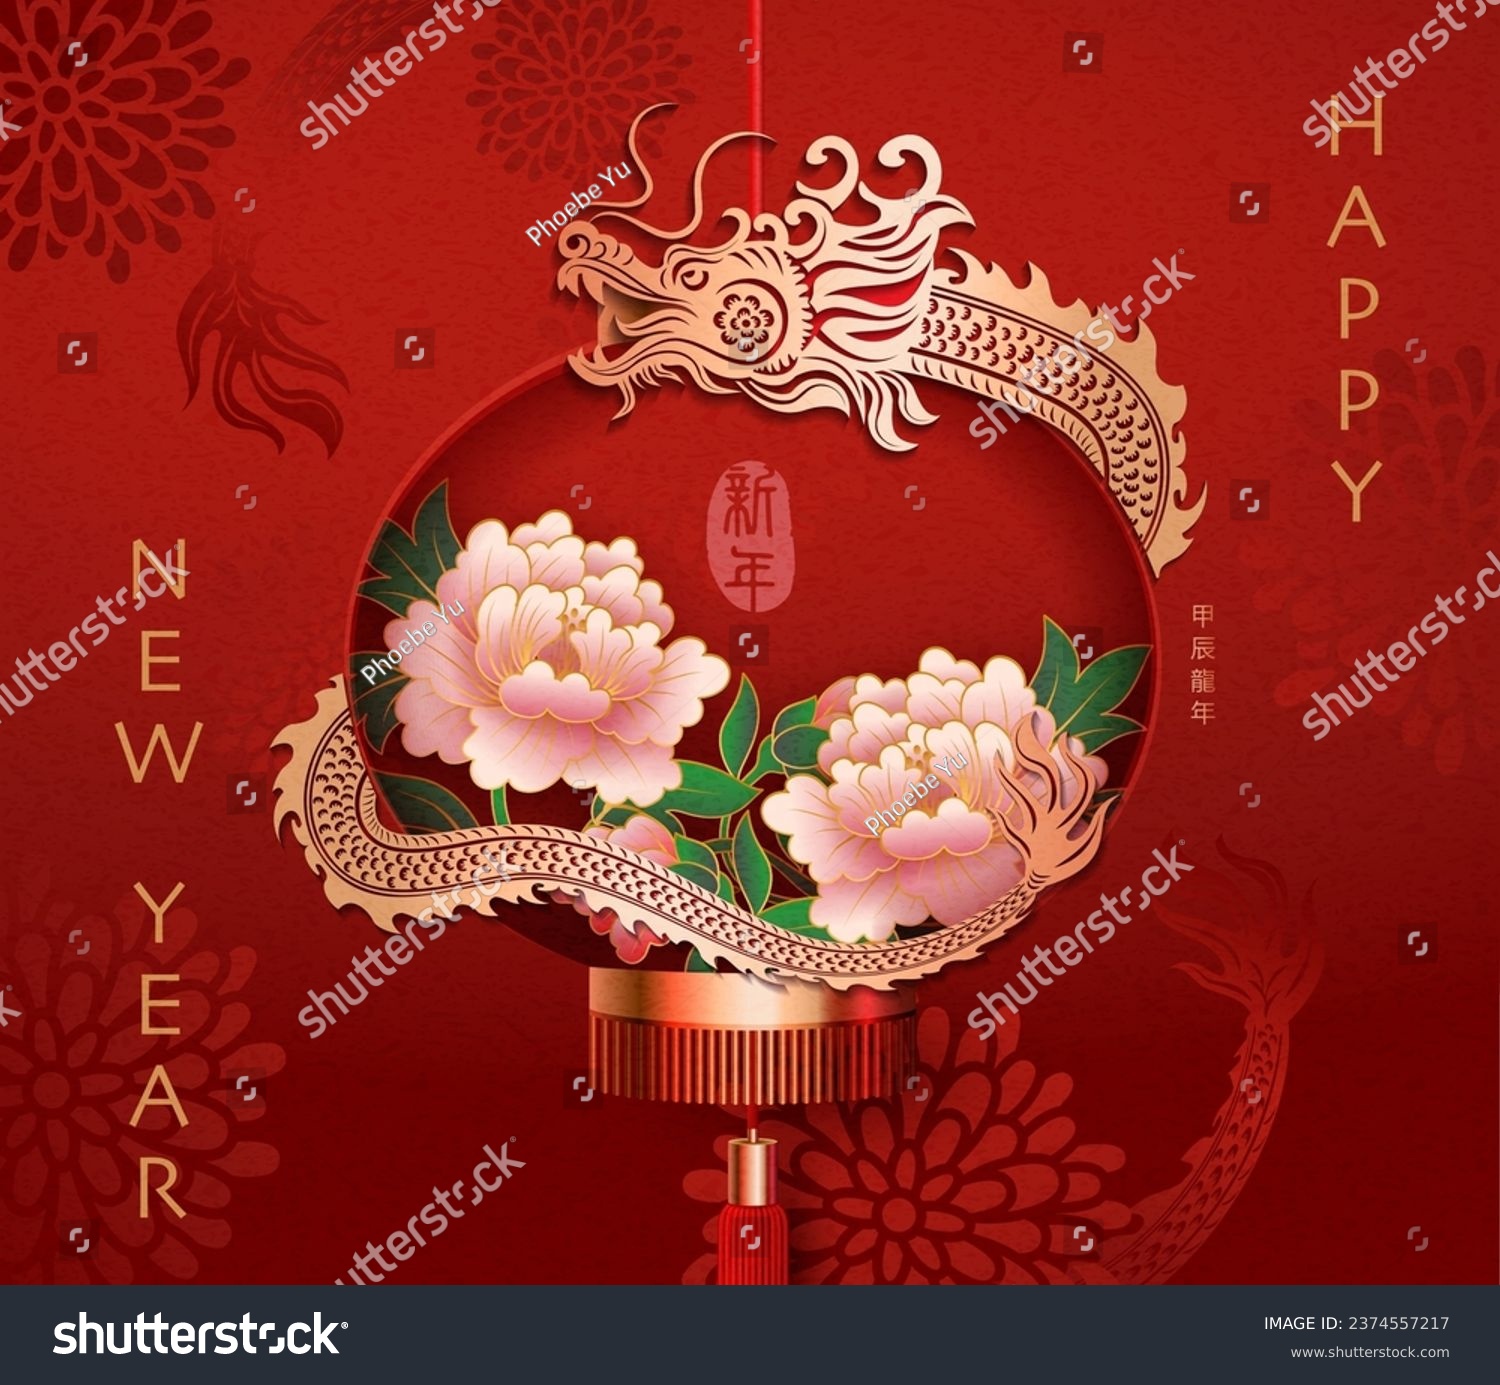 Happy Chinese new year golden relief dragon pink peony flower and traditional lantern. Chinese translation : New year of dragon #2374557217